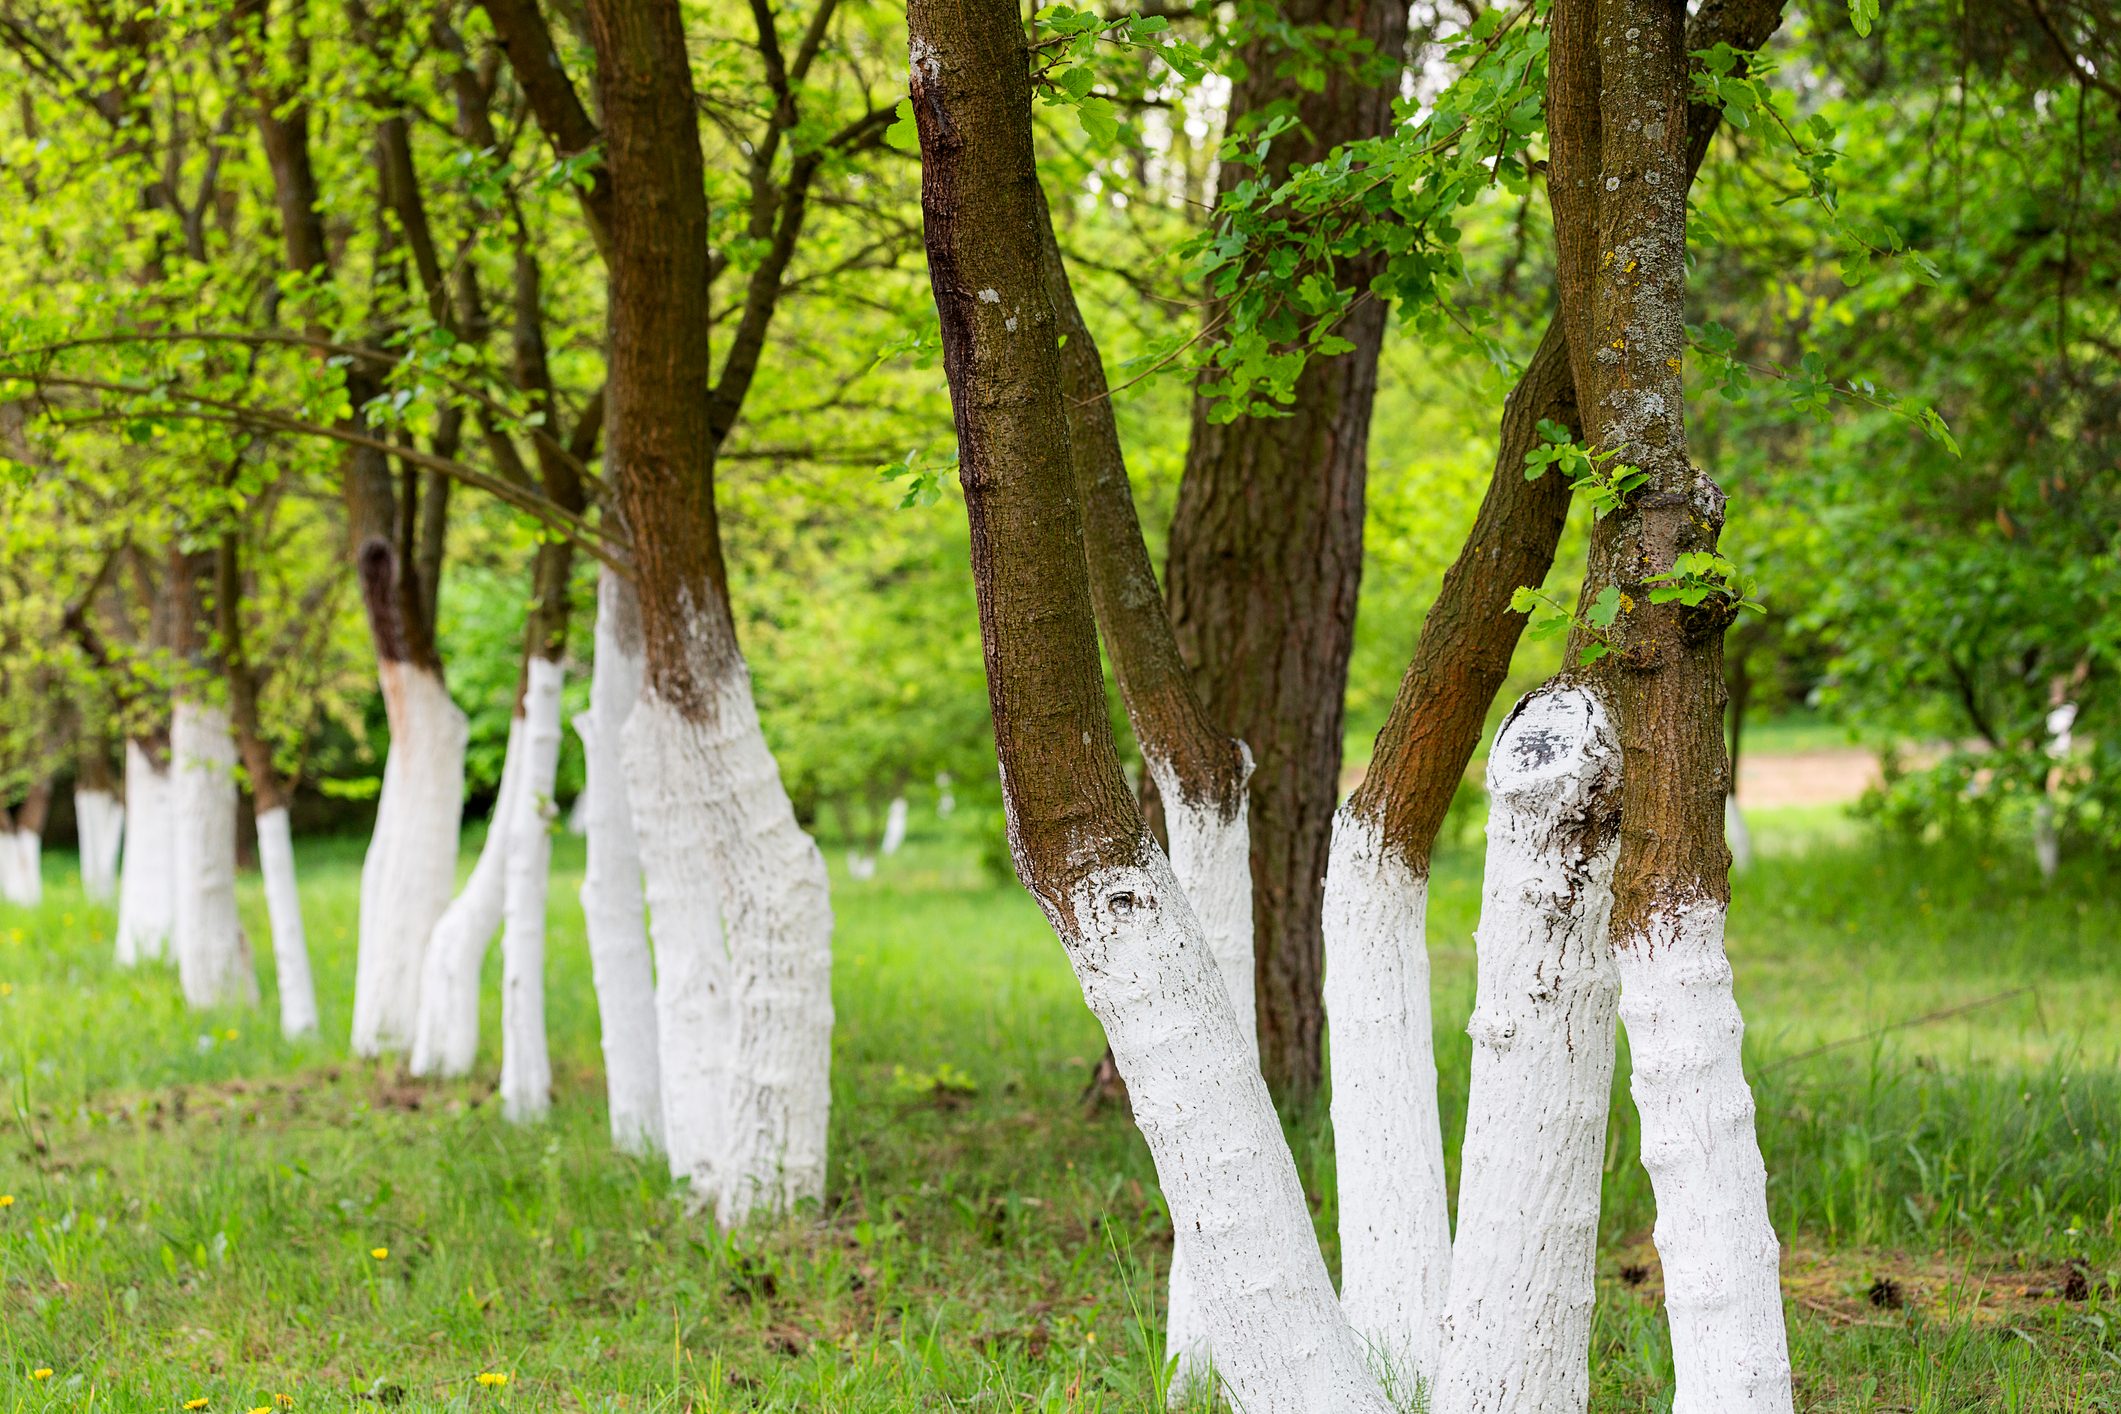 why are some trees painted white?